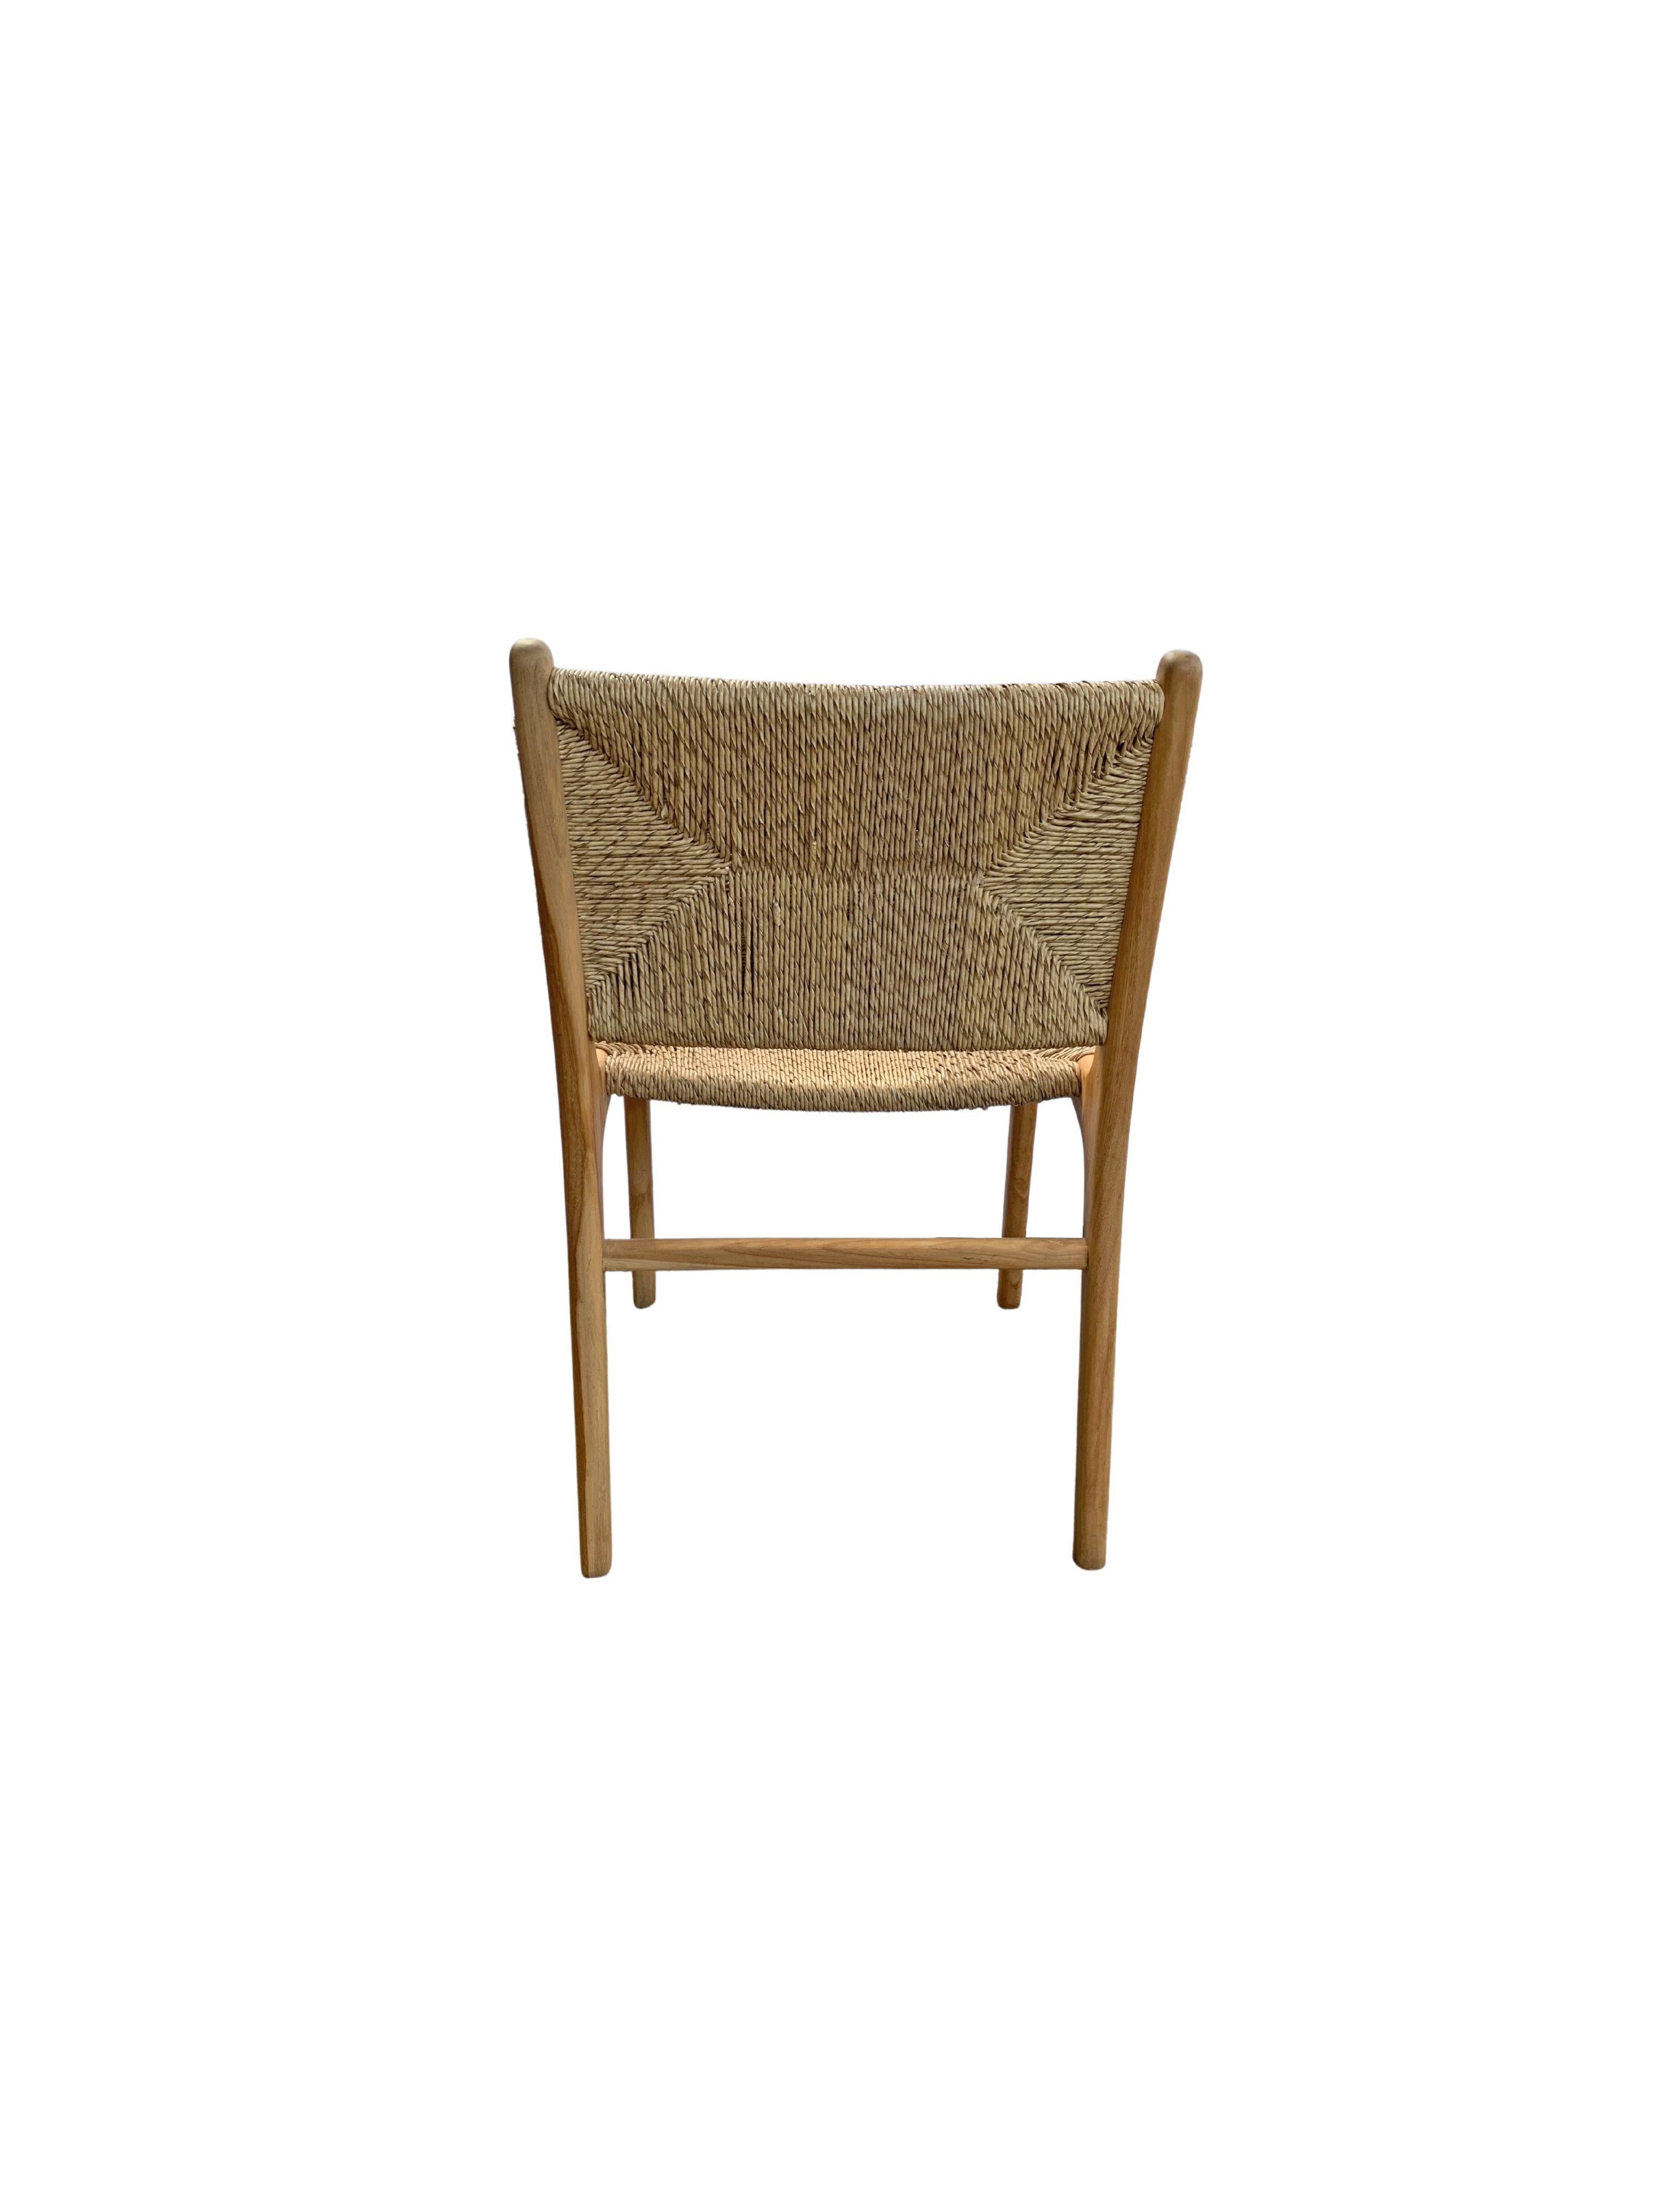 Indonesian Teak Wood Framed Chair with Woven Synthetic Rattan Seat